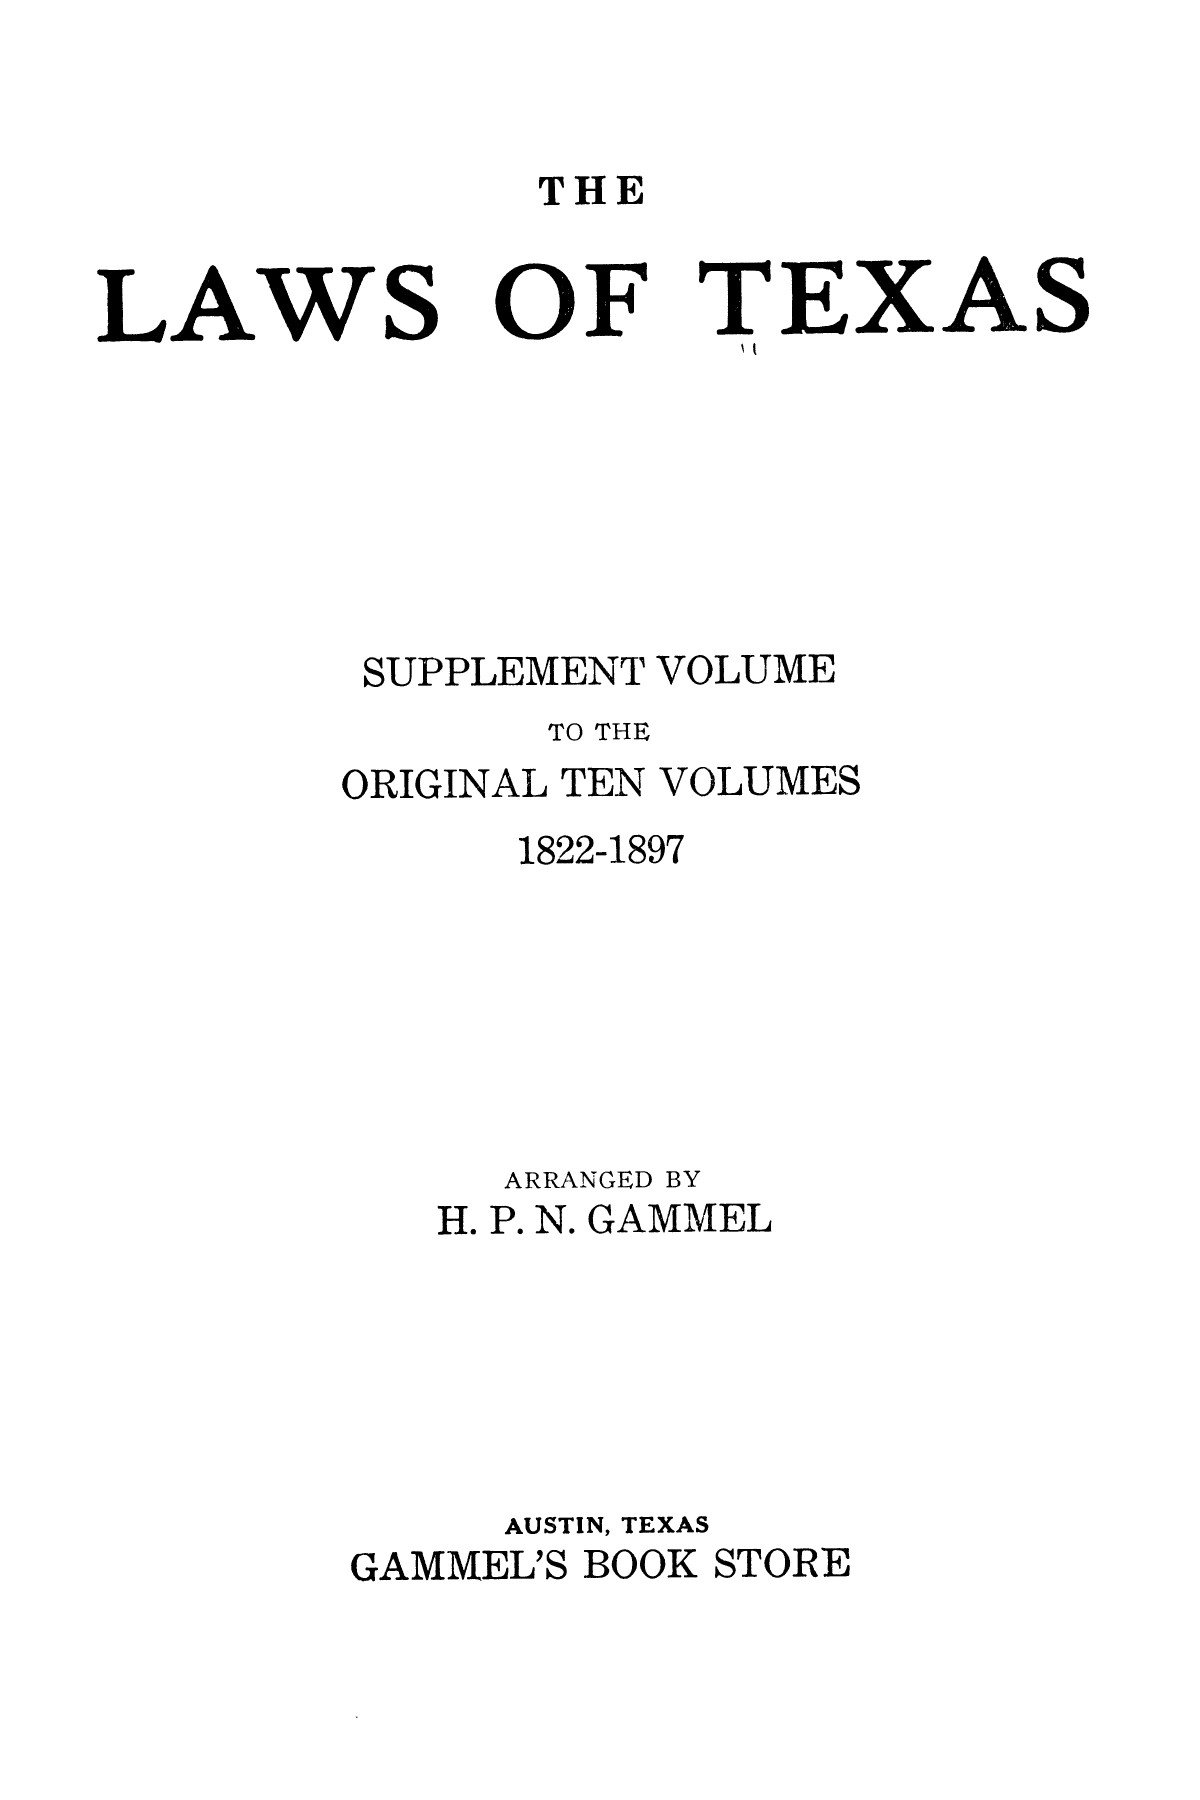 The Laws of Texas, 1931-1933 [Volume 28]
                                                
                                                    [Sequence #]: 1 of 2111
                                                